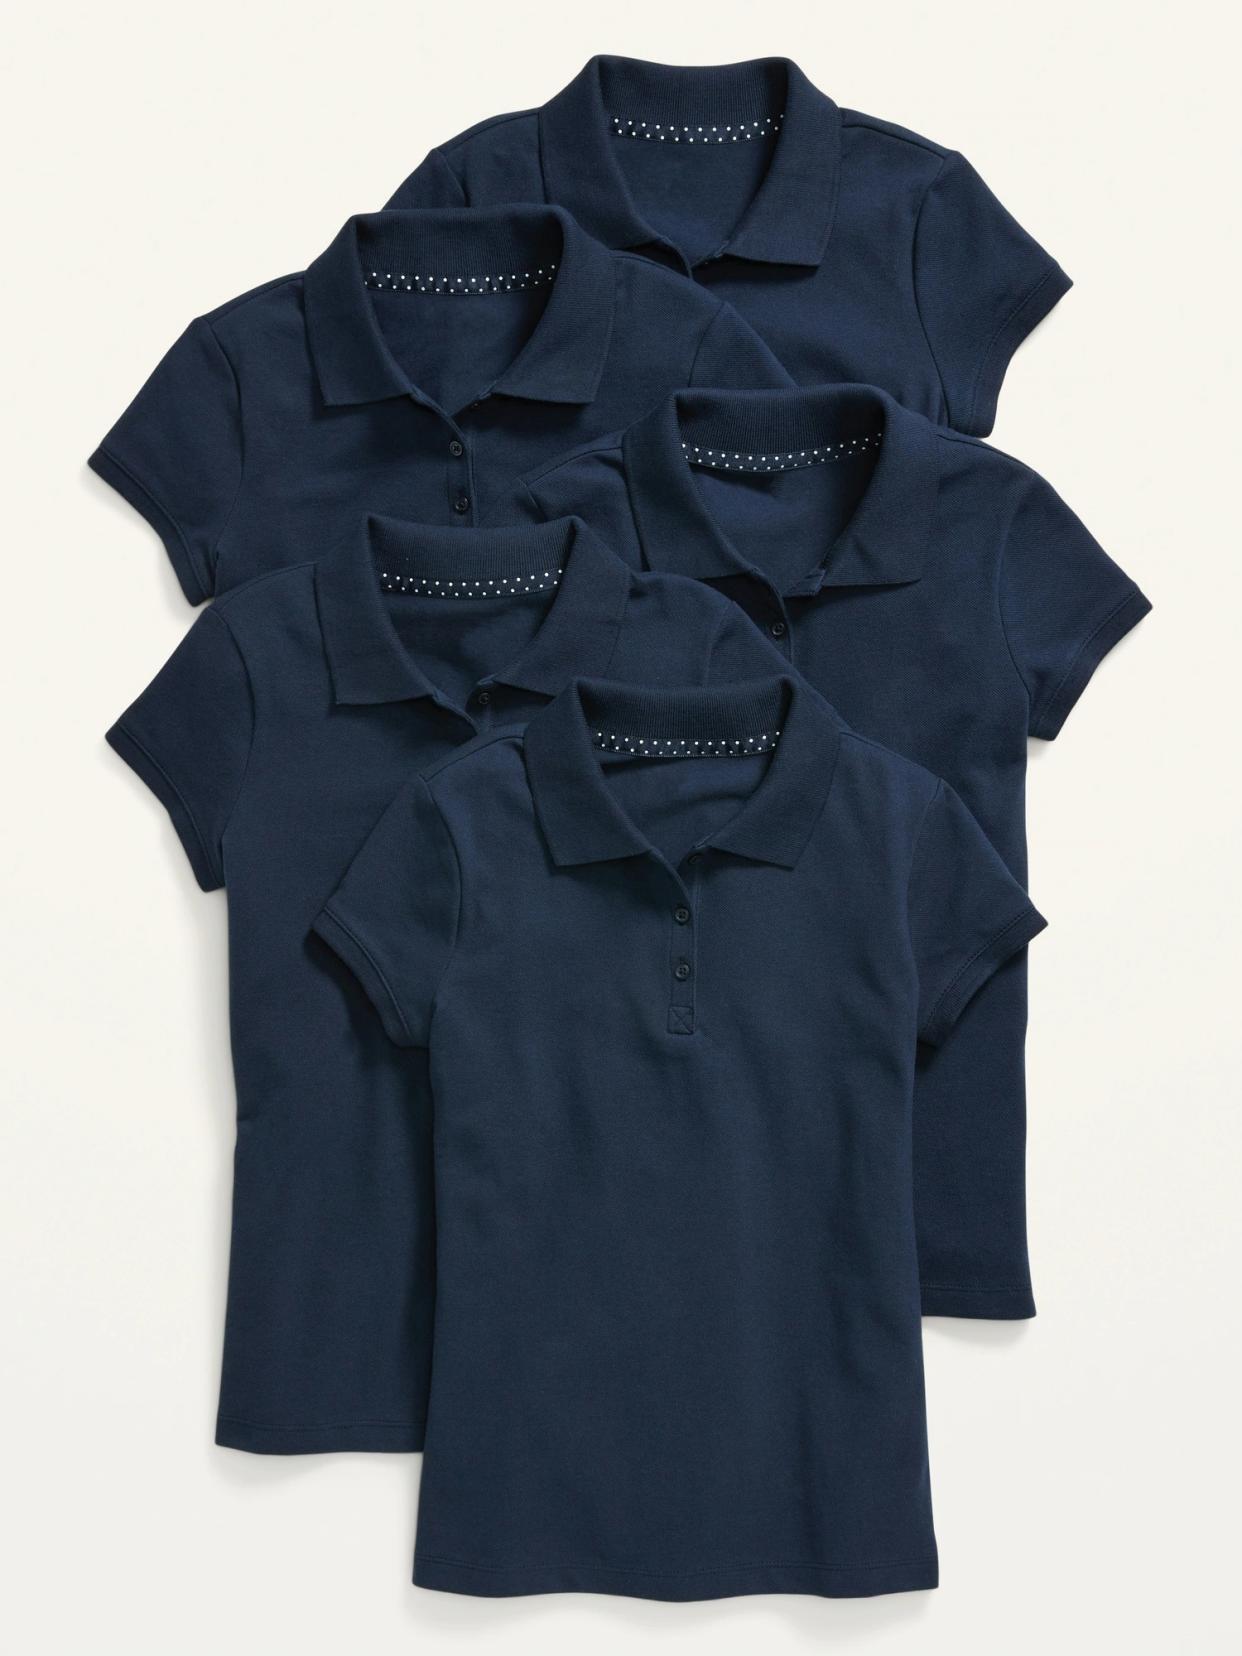 Old Navy Old Navy has deals on clothes for all ages, from preschool to post-grad. The retailer is also offering discounts on several gender neutral styles and their school uniforms, helping students save money while still sticking to the dress code. Uniform Short-Sleeve Polo Shirt 5-Pack for Girls 